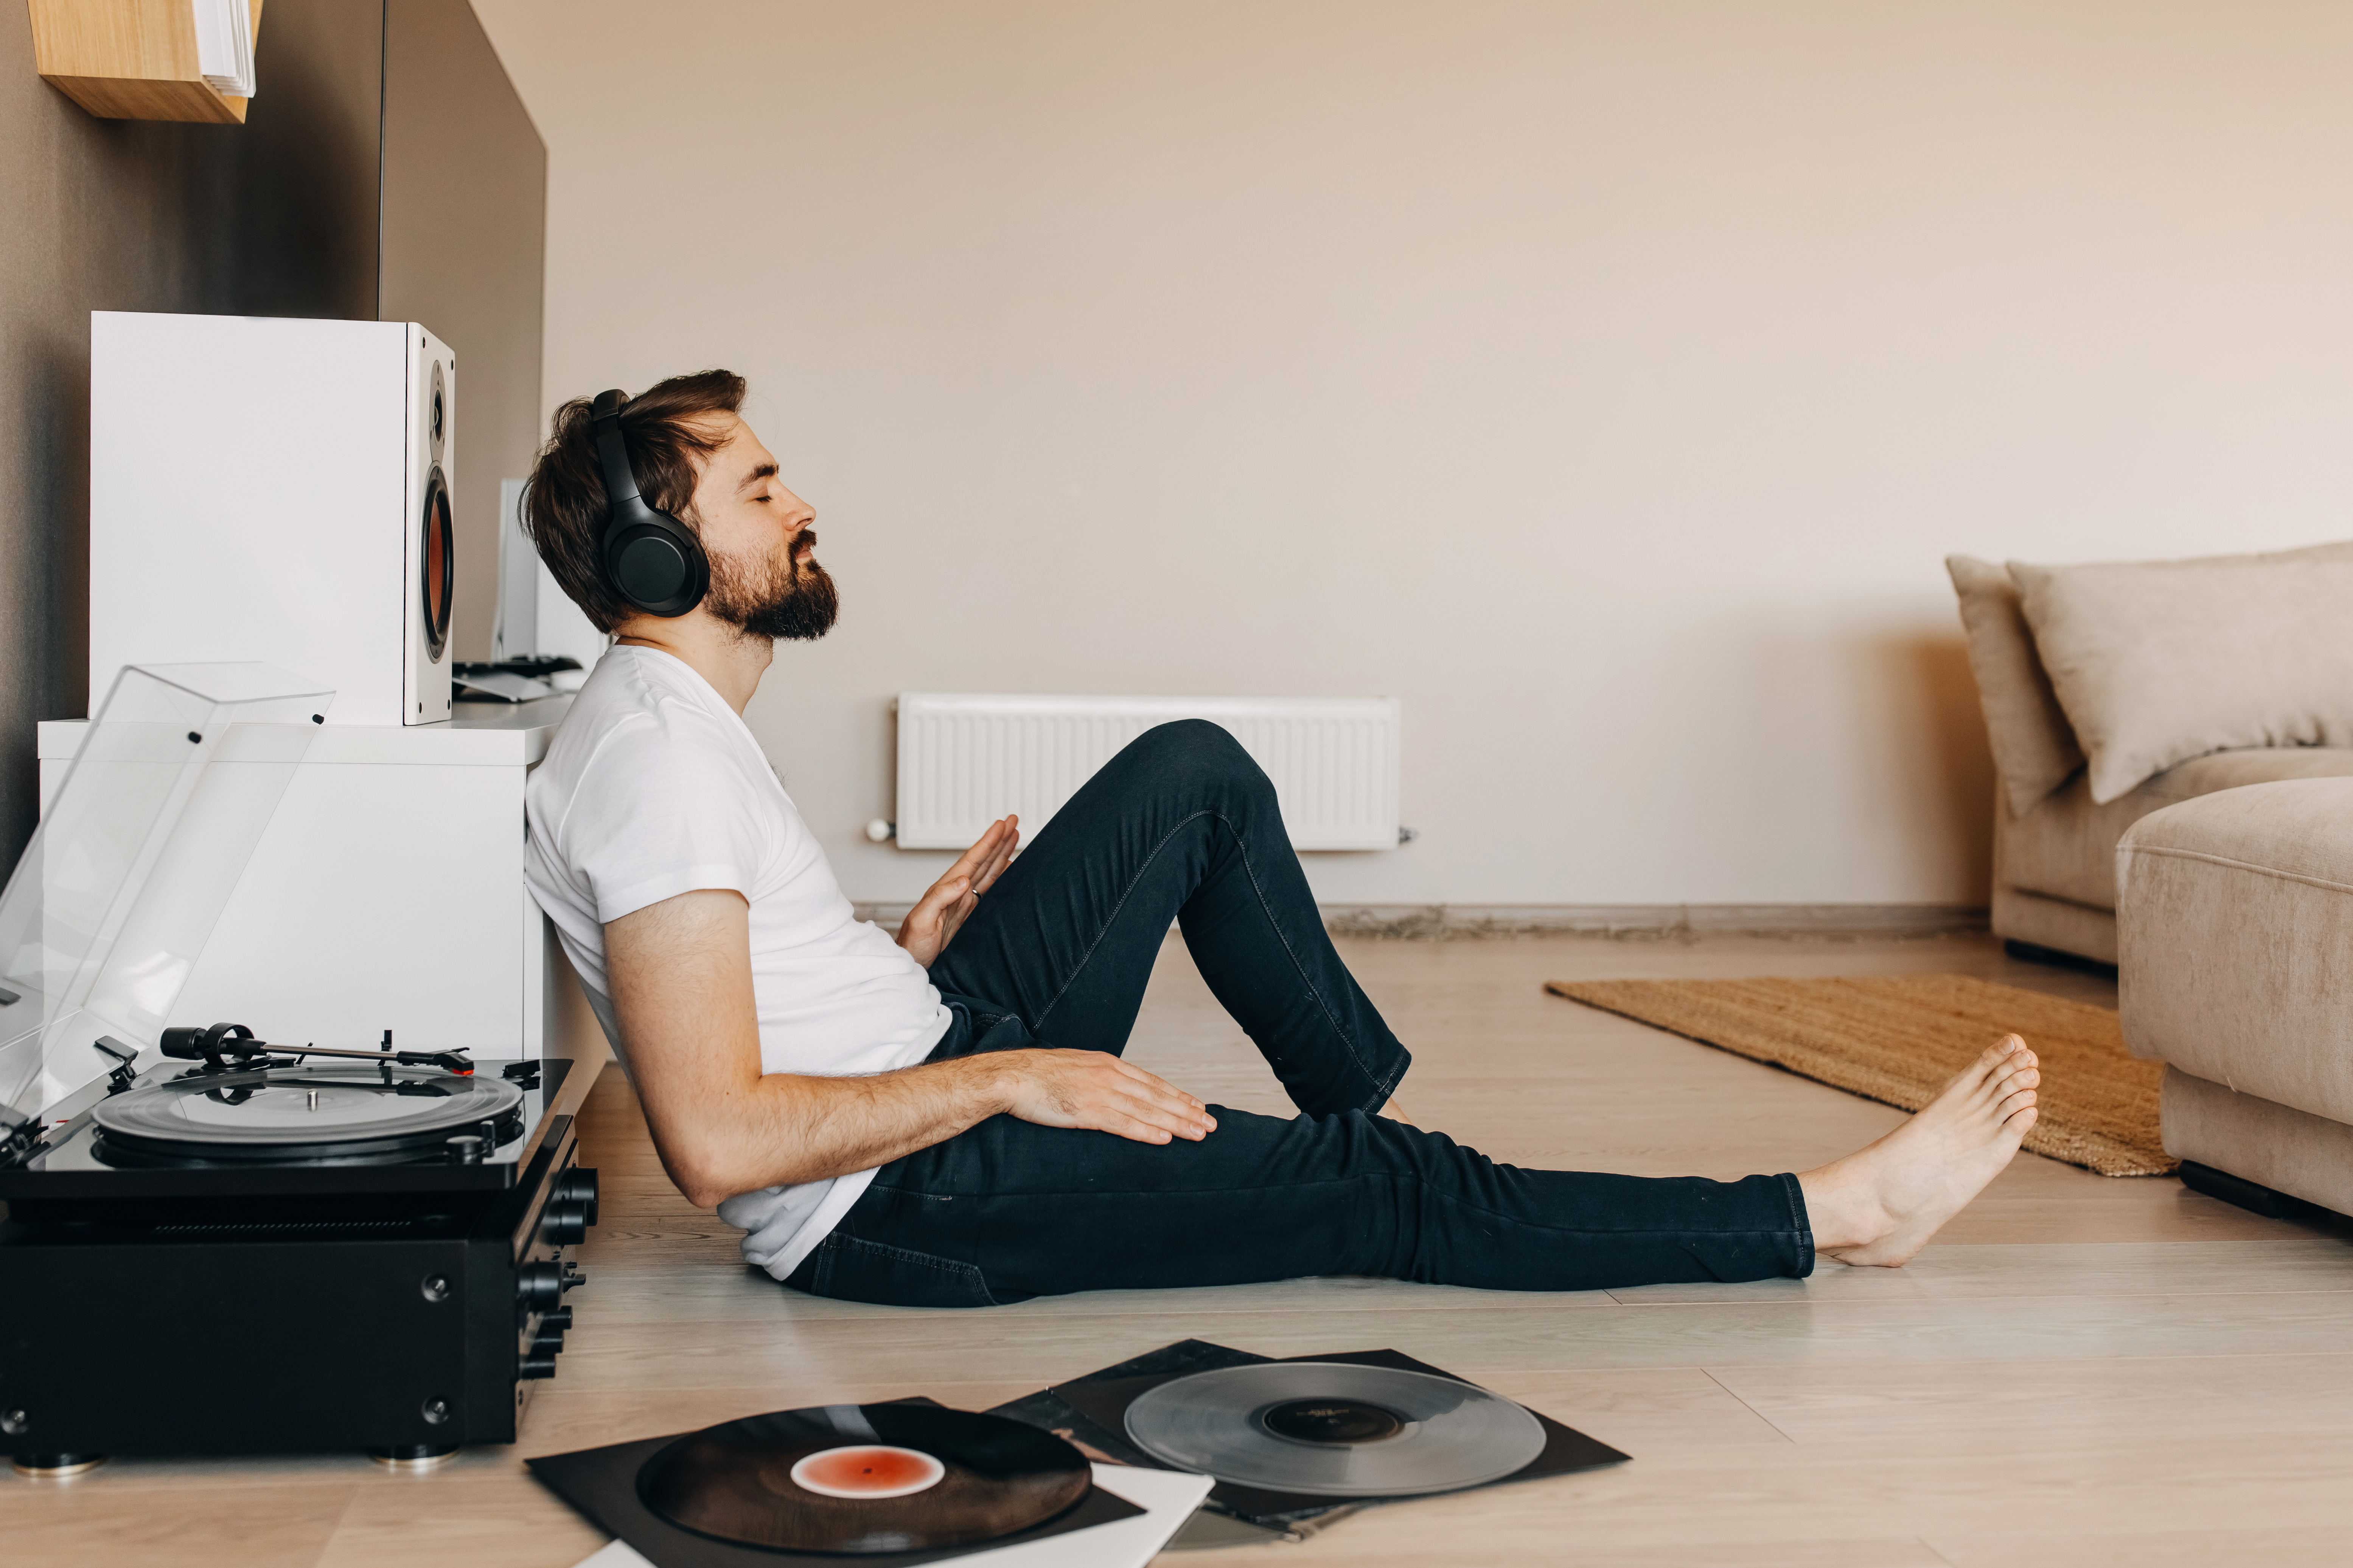 Man sitting on the ground wearing headphones and listening to music on a record player